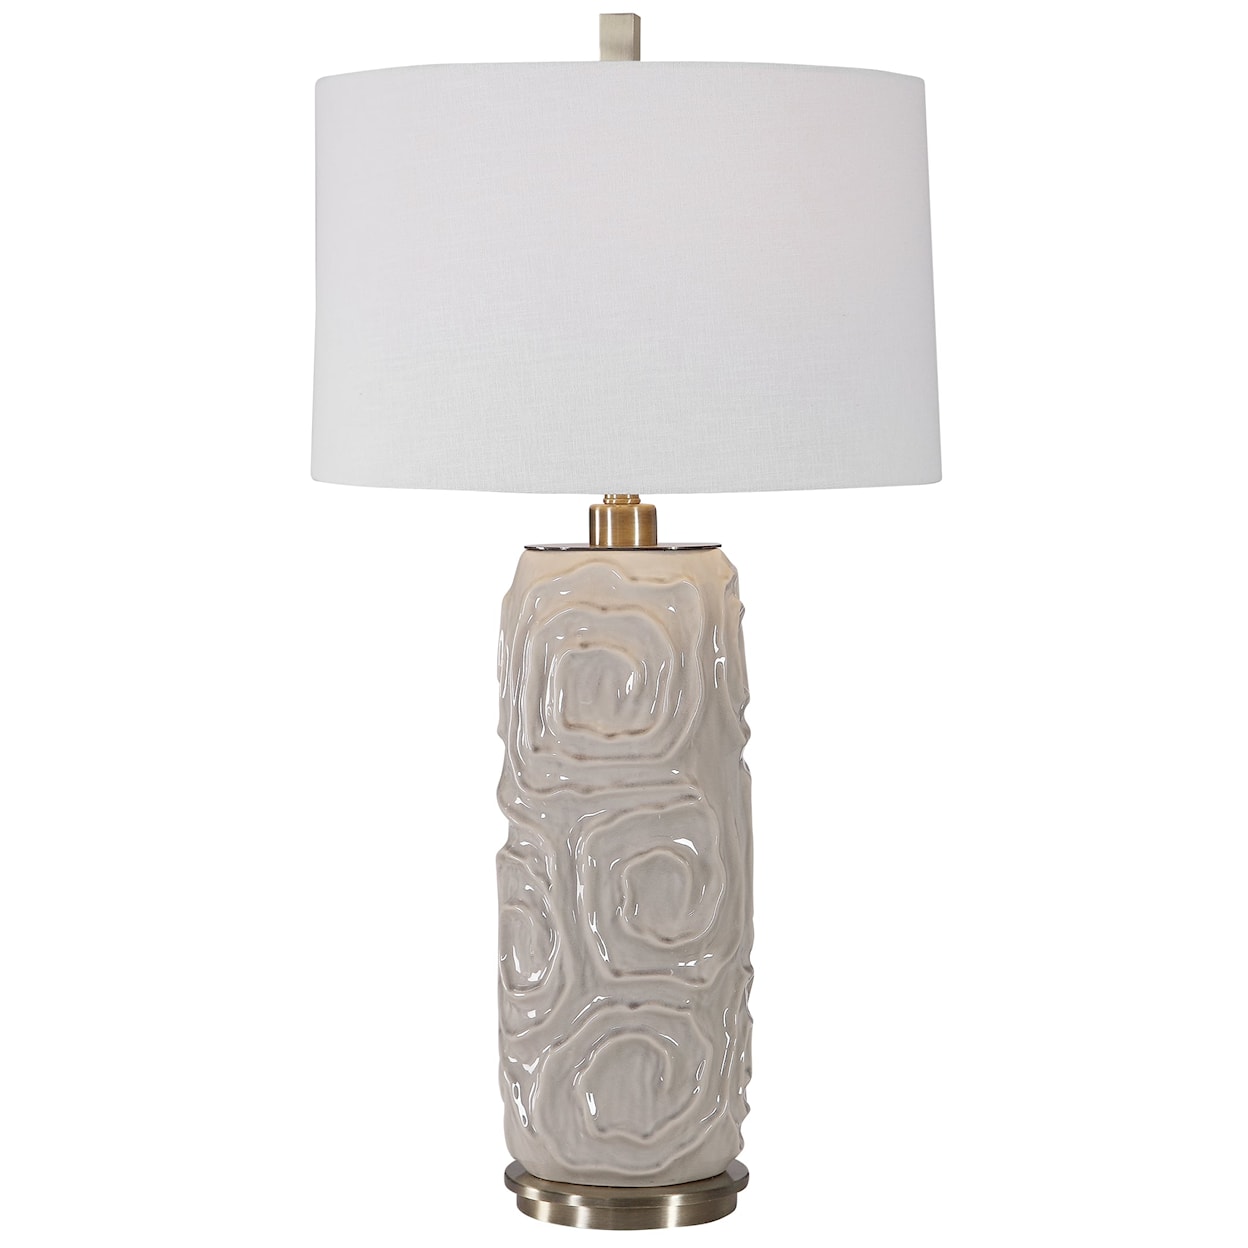 Uttermost Table Lamps Zade Warm Gray Table Lamp